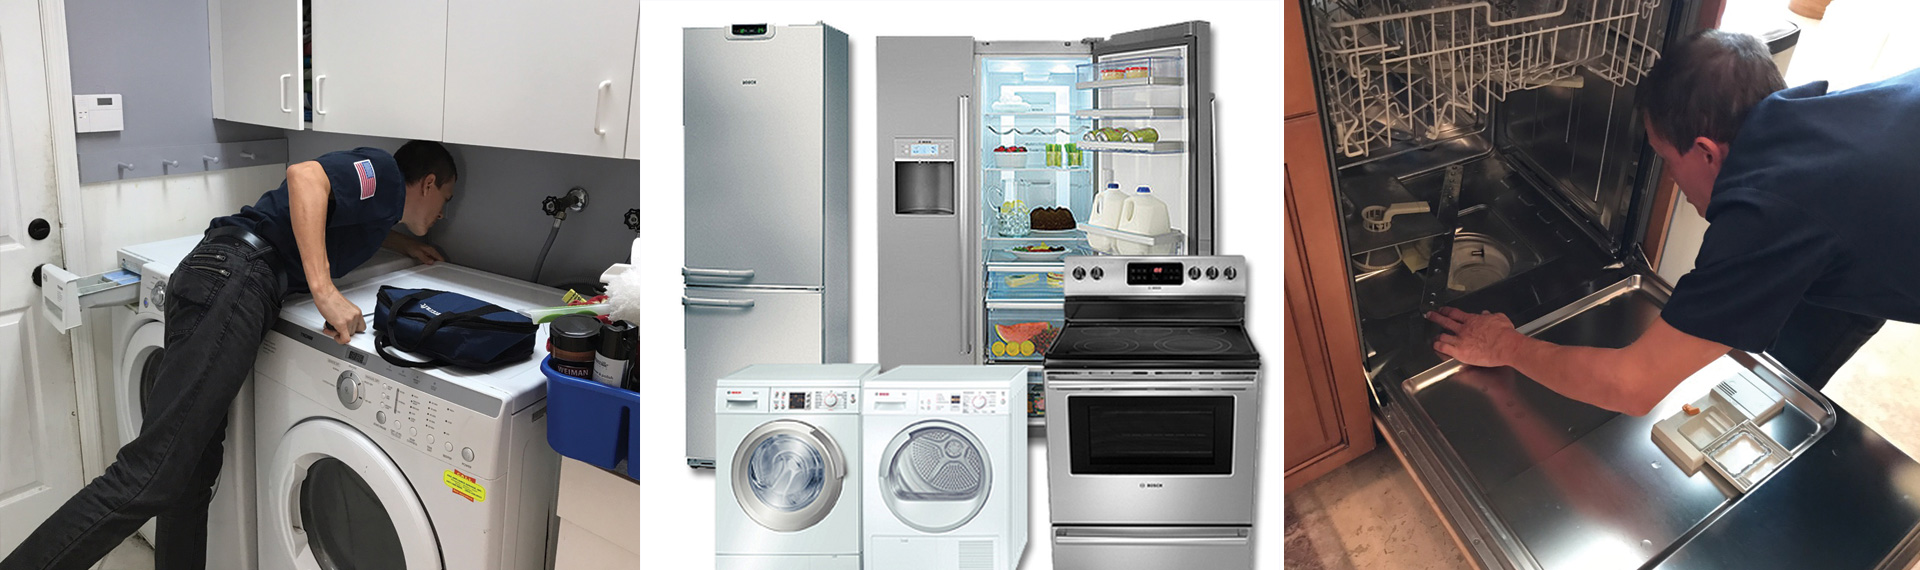 Samsung, Kenmore, Whirlpool, Hot Point, LG, Admiral, Maytag appliances